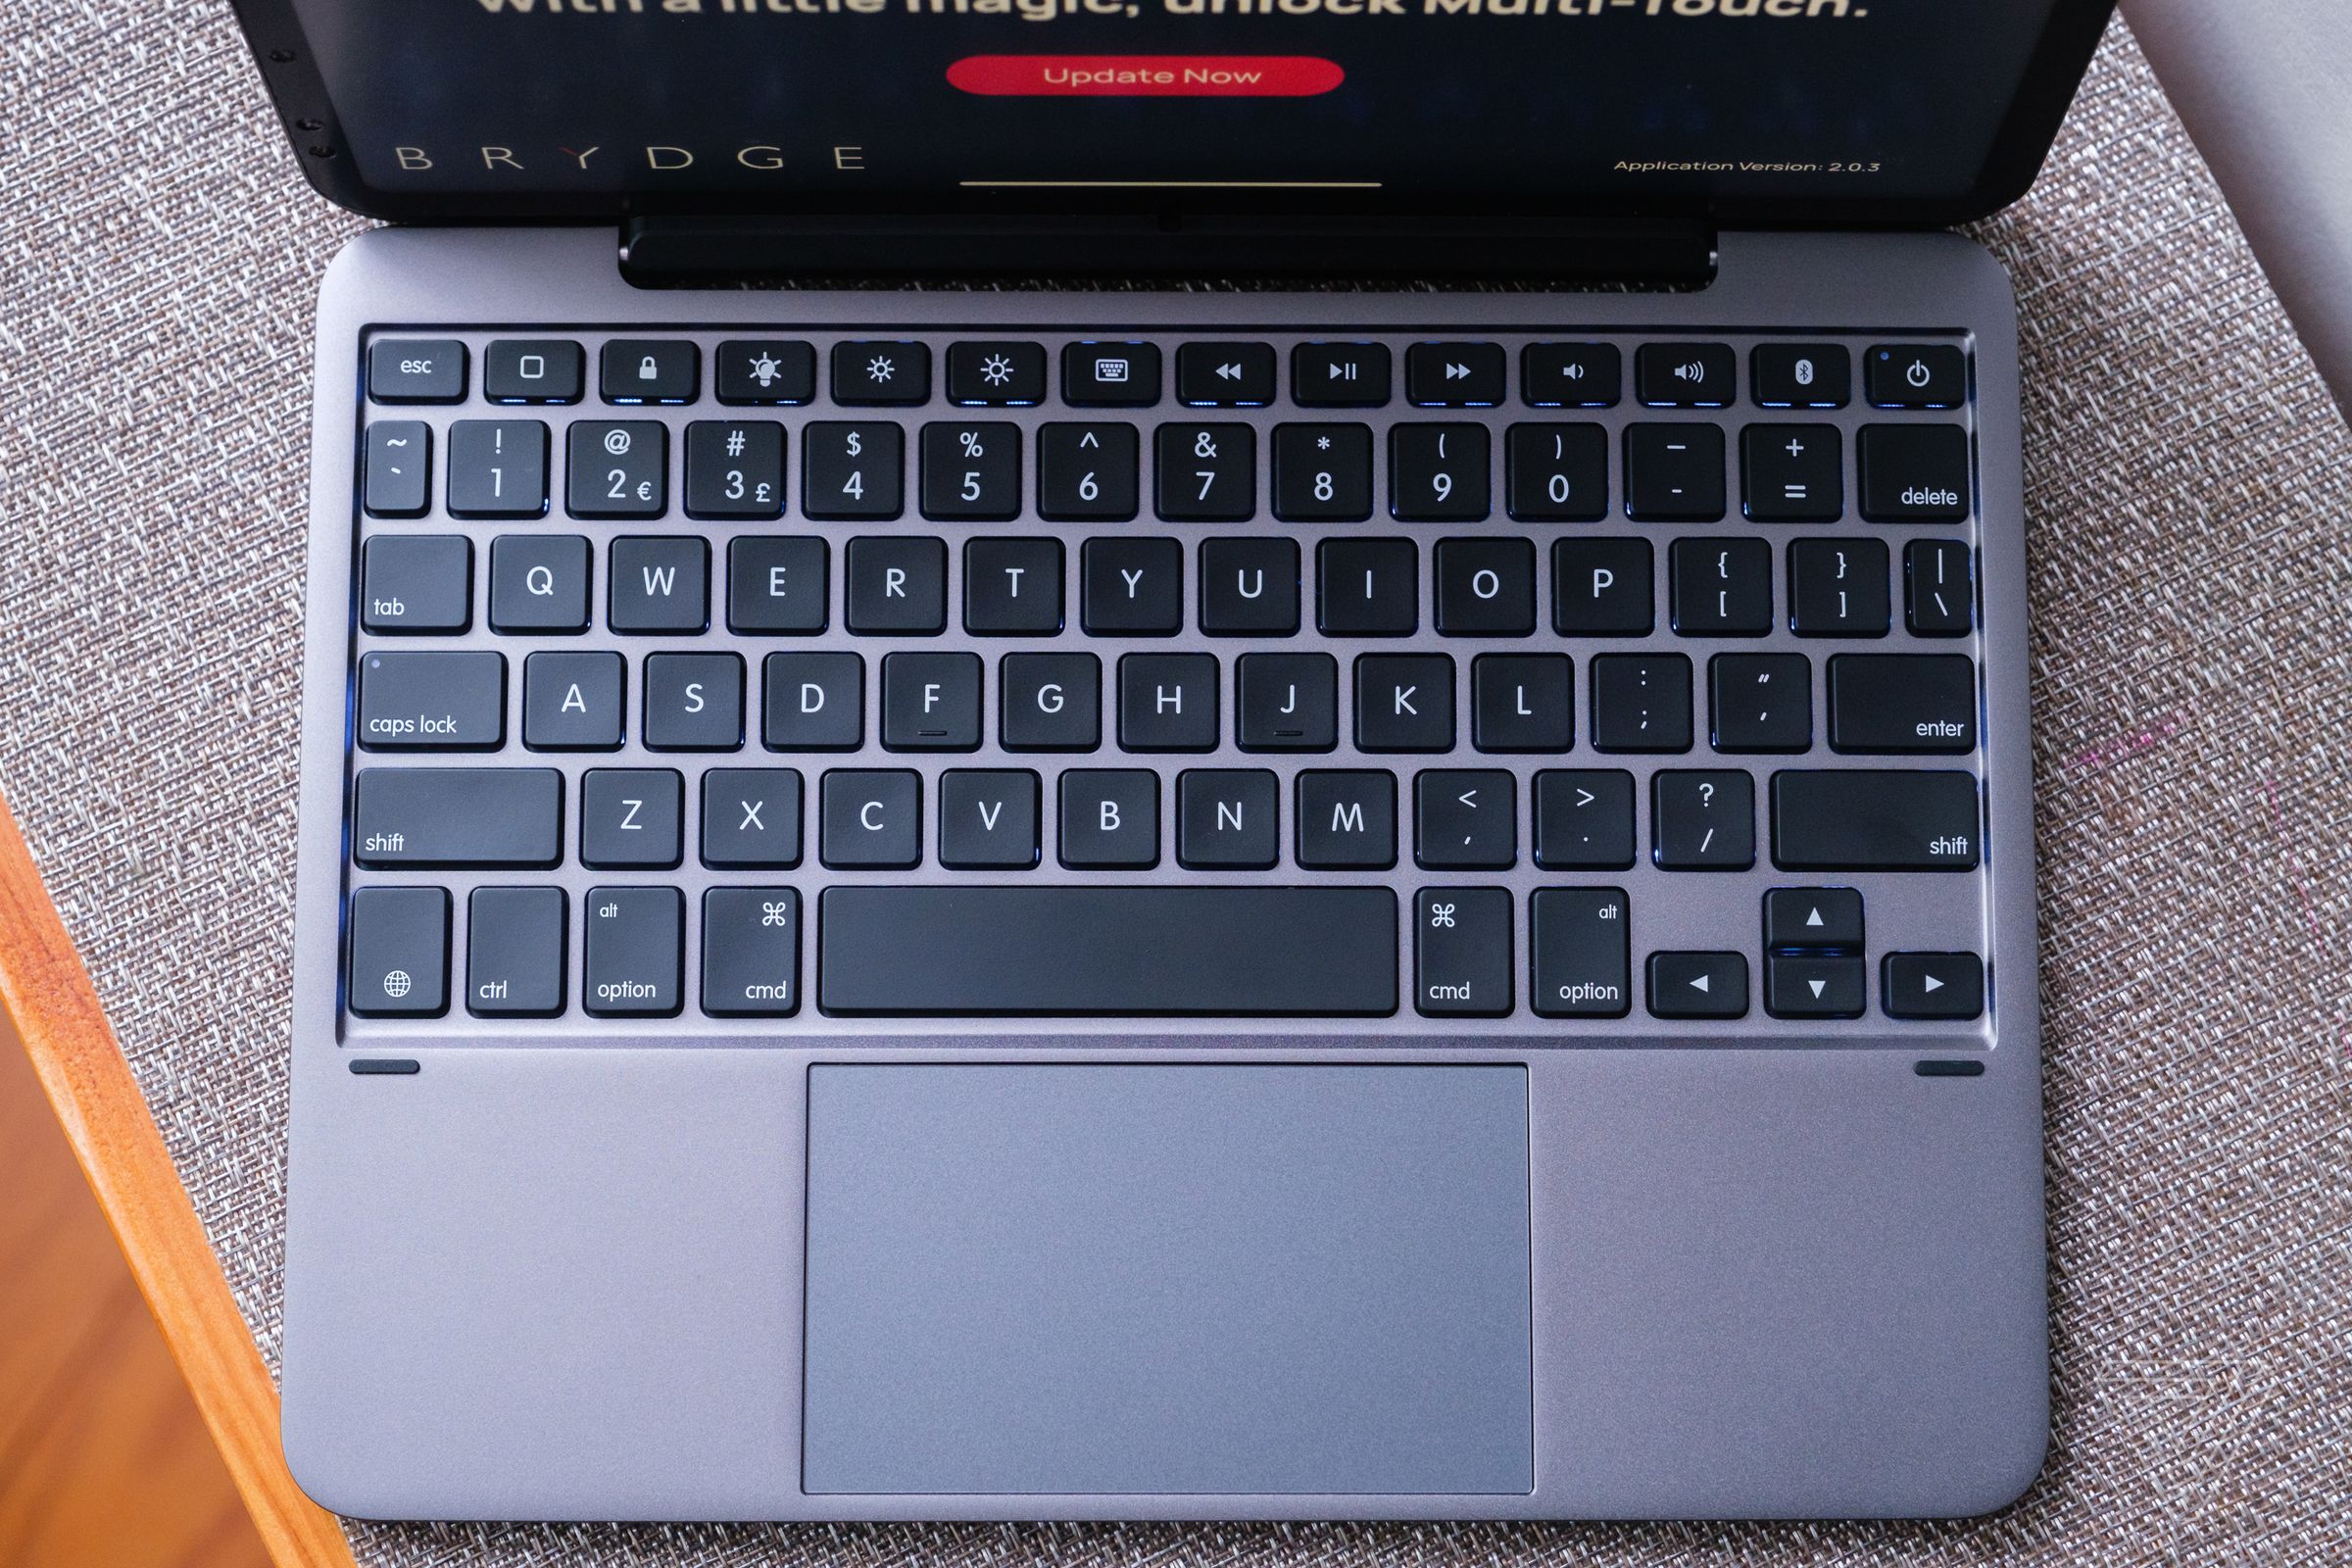 The 11 Max Plus has a full keyboard with function row and a large multitouch trackpad.